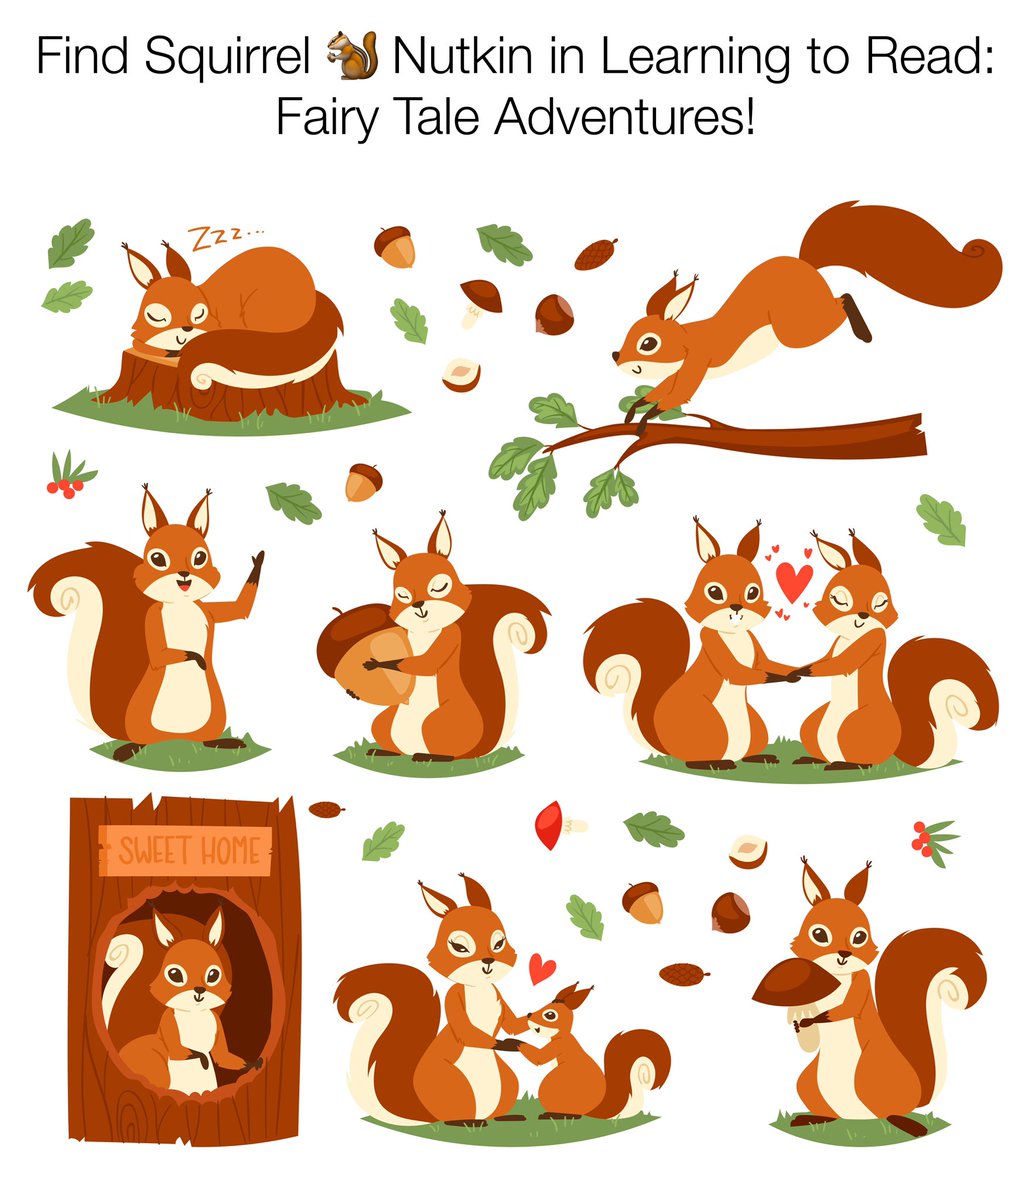 Follow Squirrel 🐿️ 🌰 Nutkin in Learning to Read: Fairy Tale Adventures! christiansforever.com/summertime-fun… #fairytaleadventures #animalbooksforkids #ldsbookstoreforkids #amazonbooksforkids #kidsbooks #kidsaudiobooks #kidskindlebooks #kidsactivities #kidsvideos